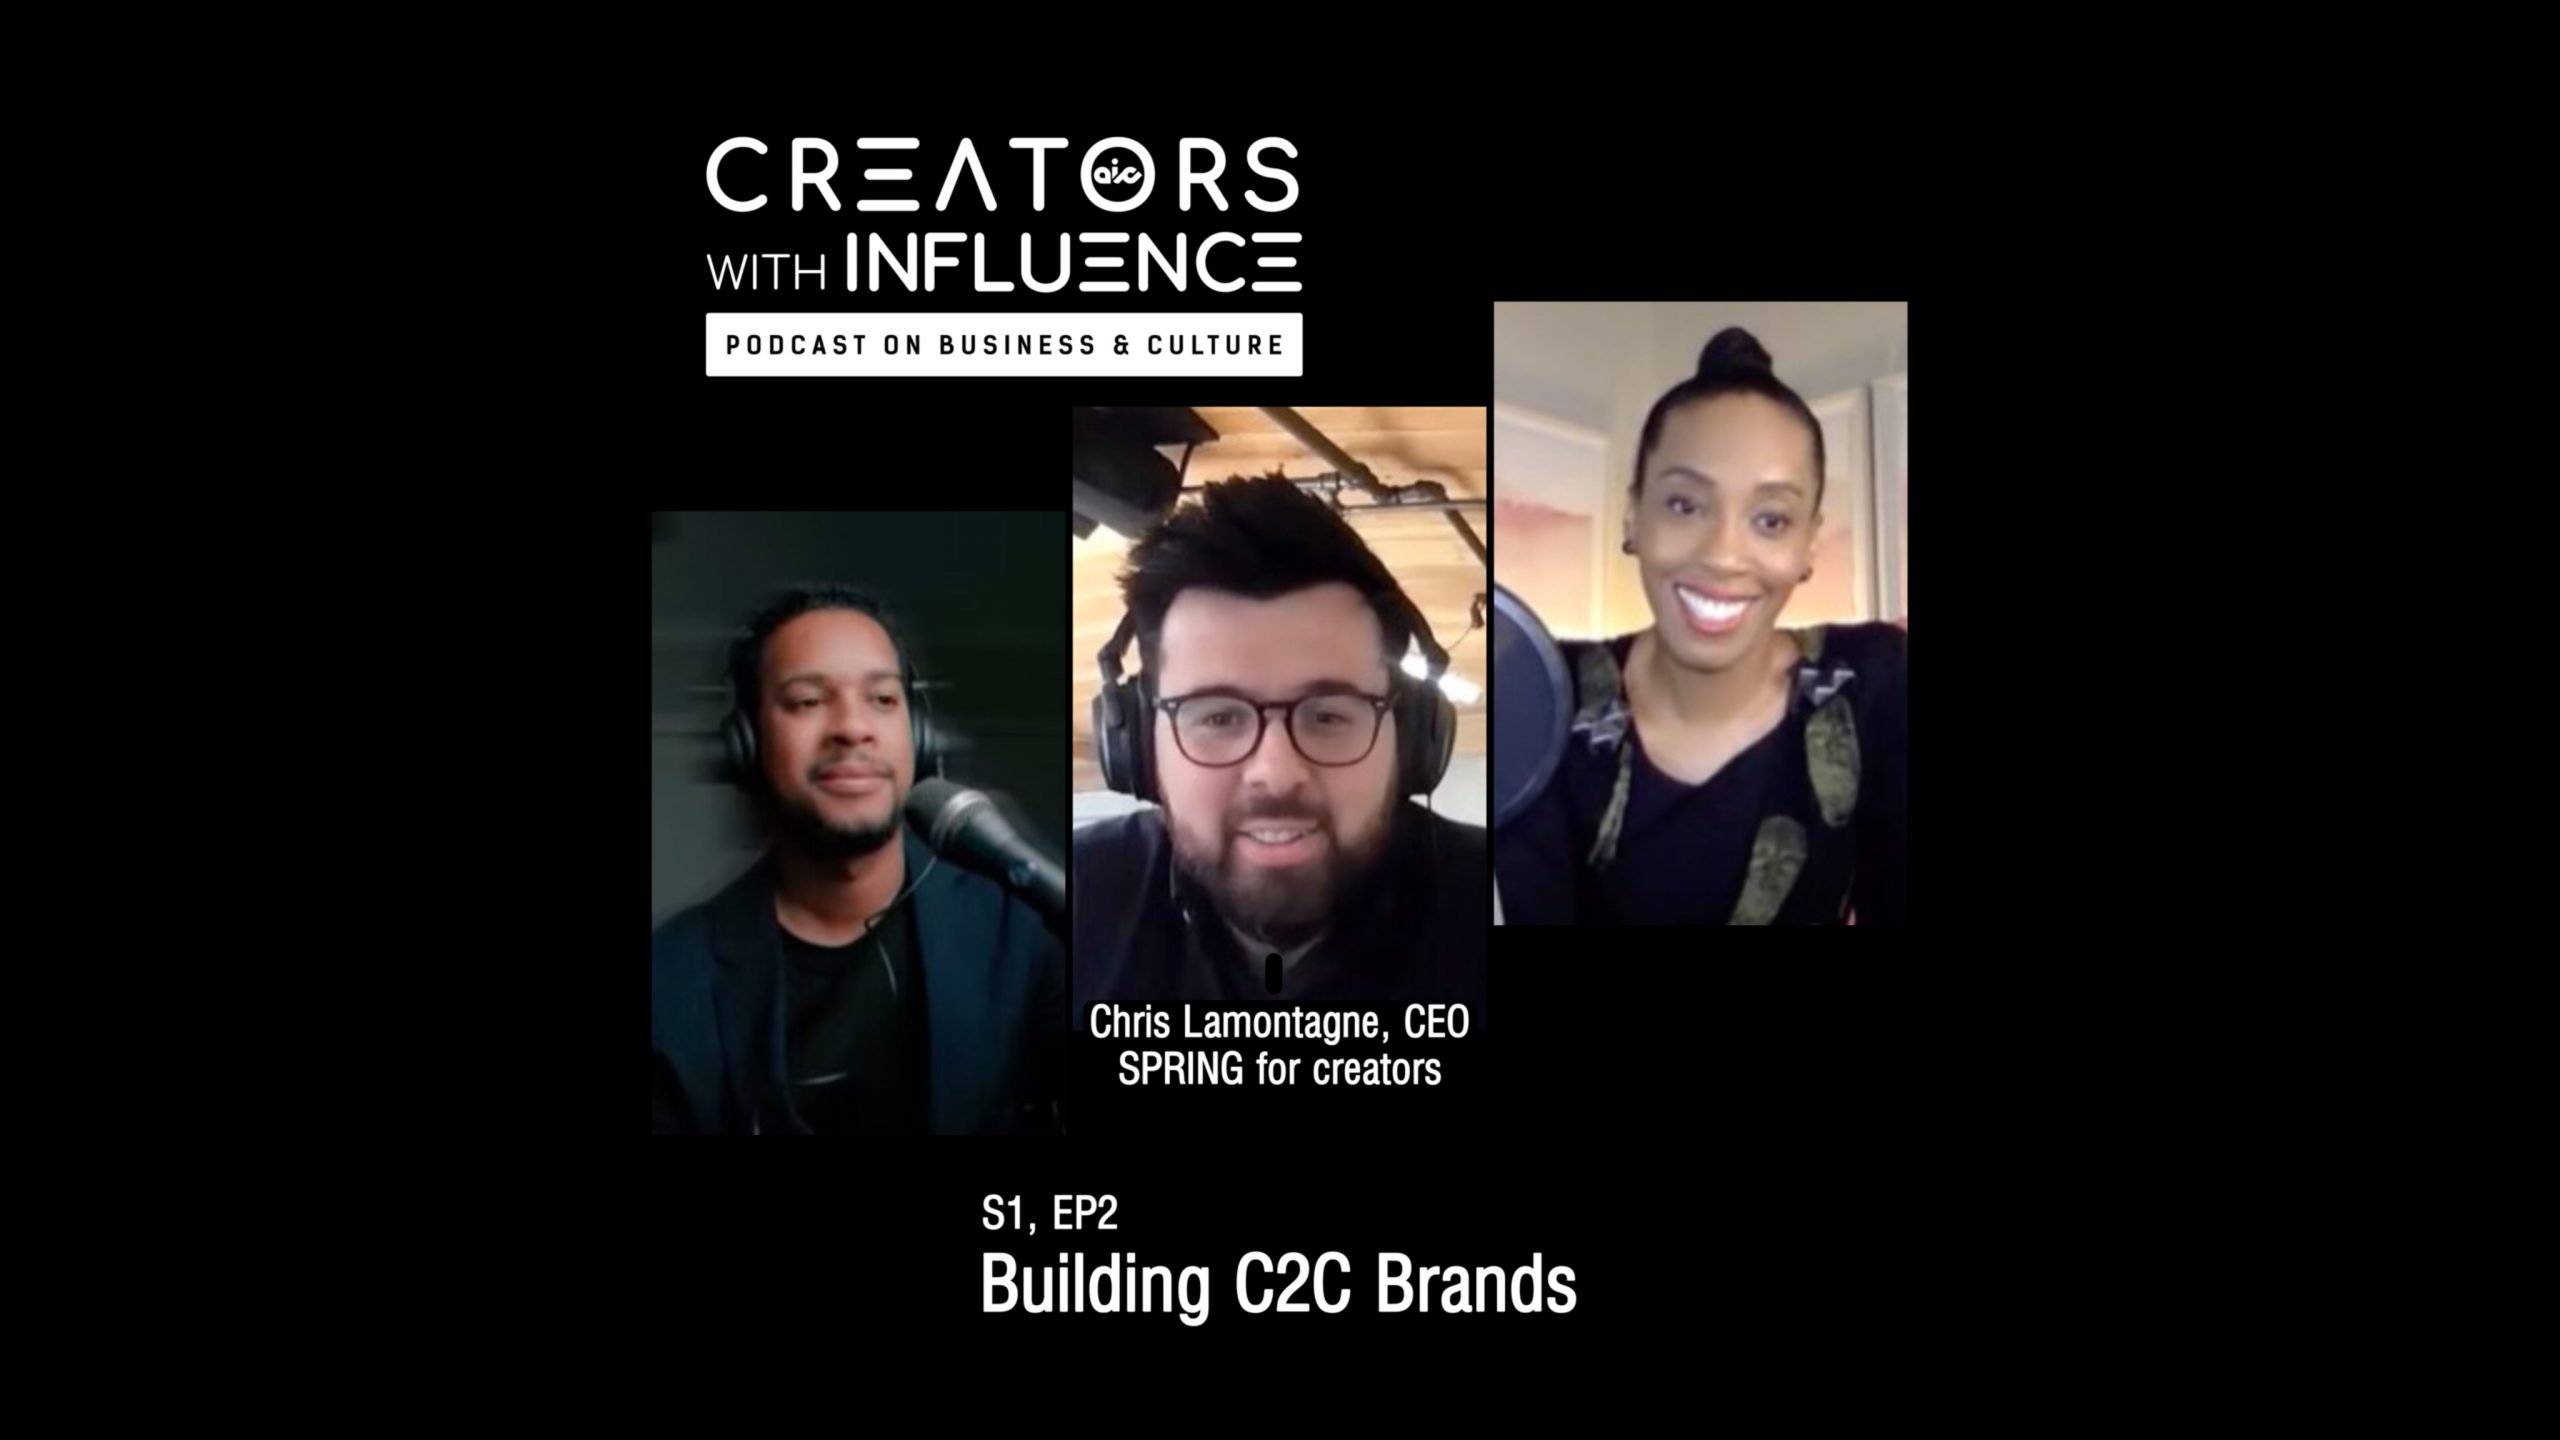 Creators with Influence Podcast: Chris Lamontagne, CEO of SPRING for creators, on Building a C2C Brand